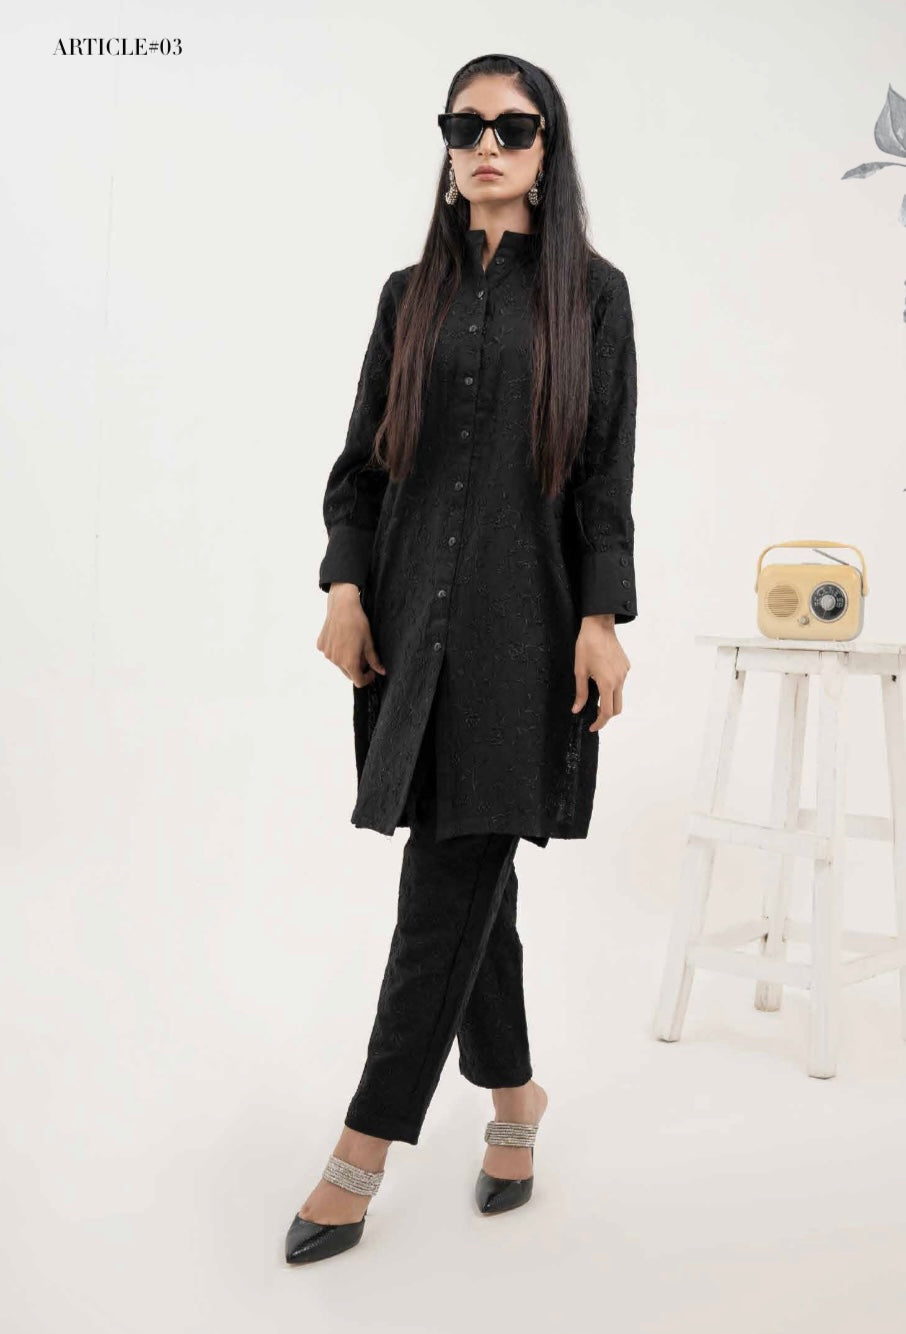 SIMRANS Dhanak Fully Embroidered 2 Pc Co-ords Set in Black article-06